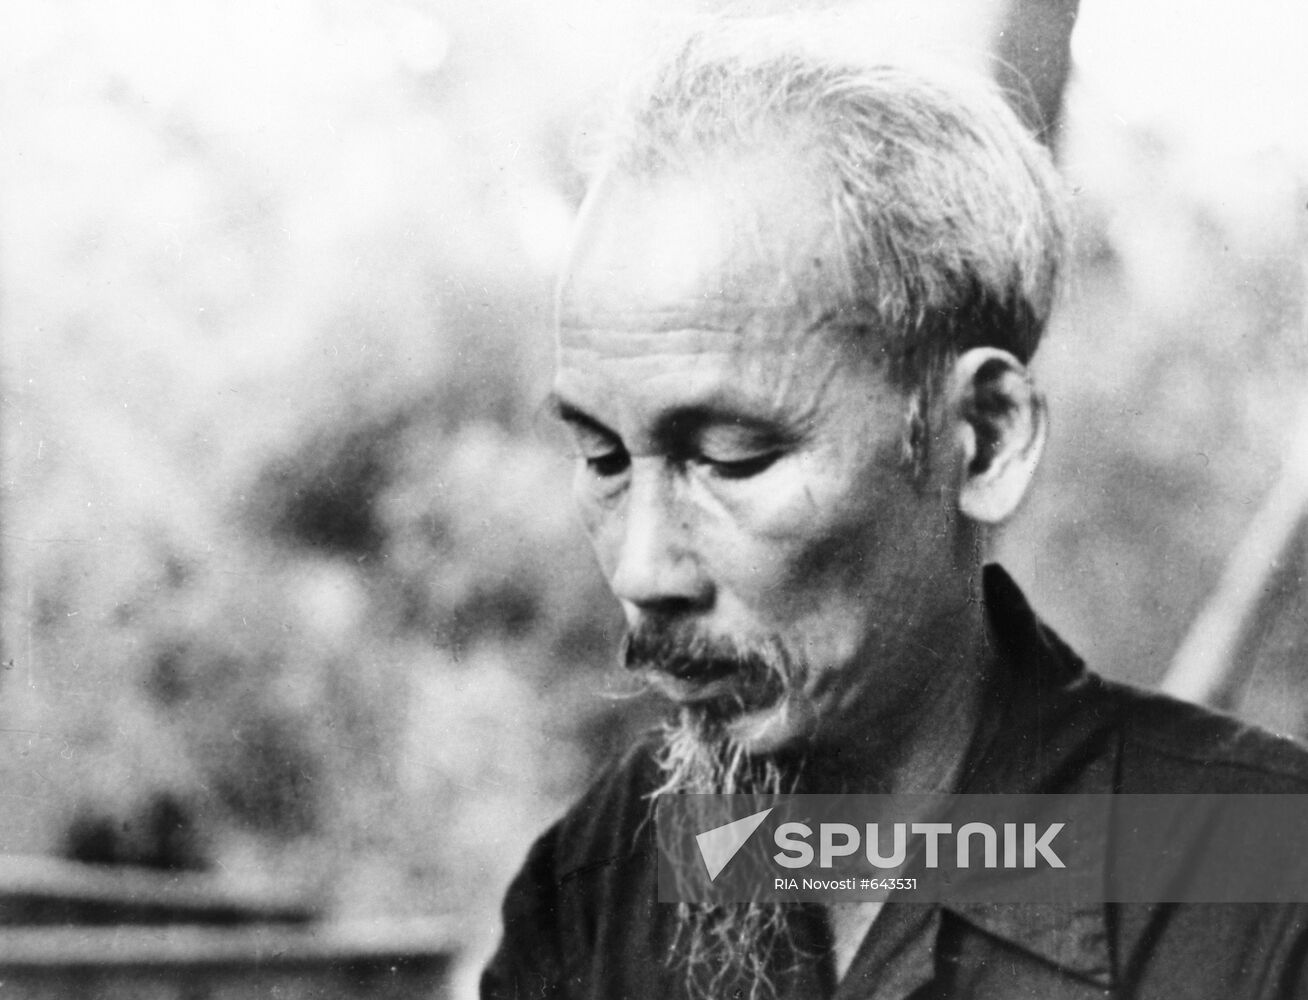 "His Name Was Ho Chi Minh"